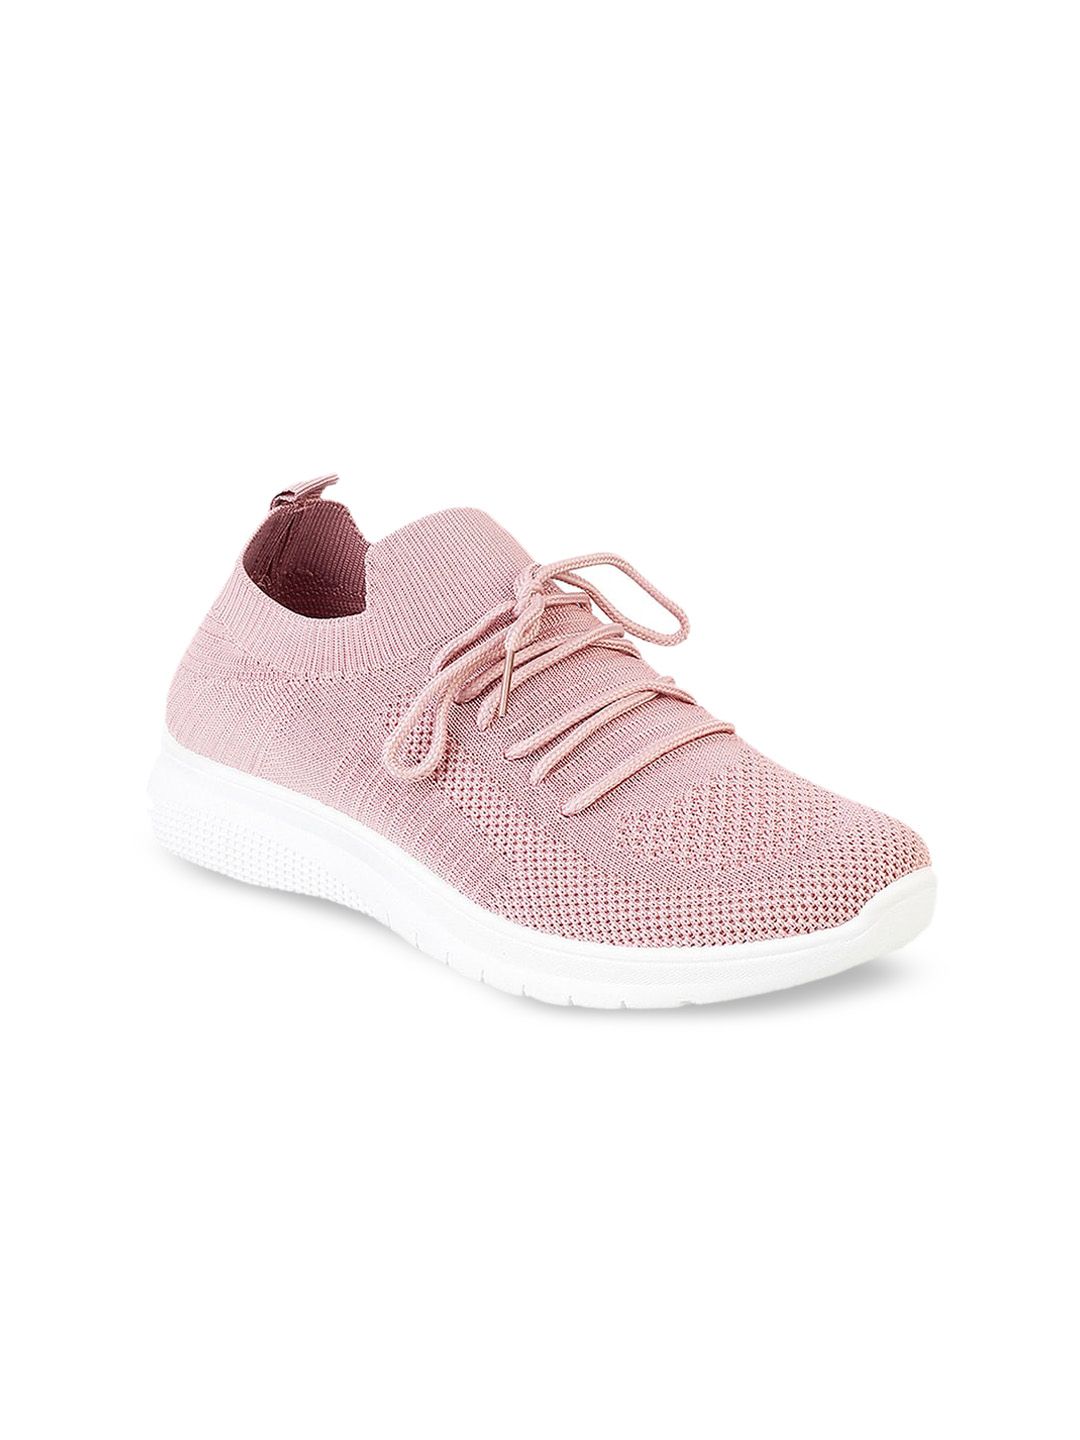 WALKWAY by Metro Women Peach-Coloured Woven Design Sneakers Price in India